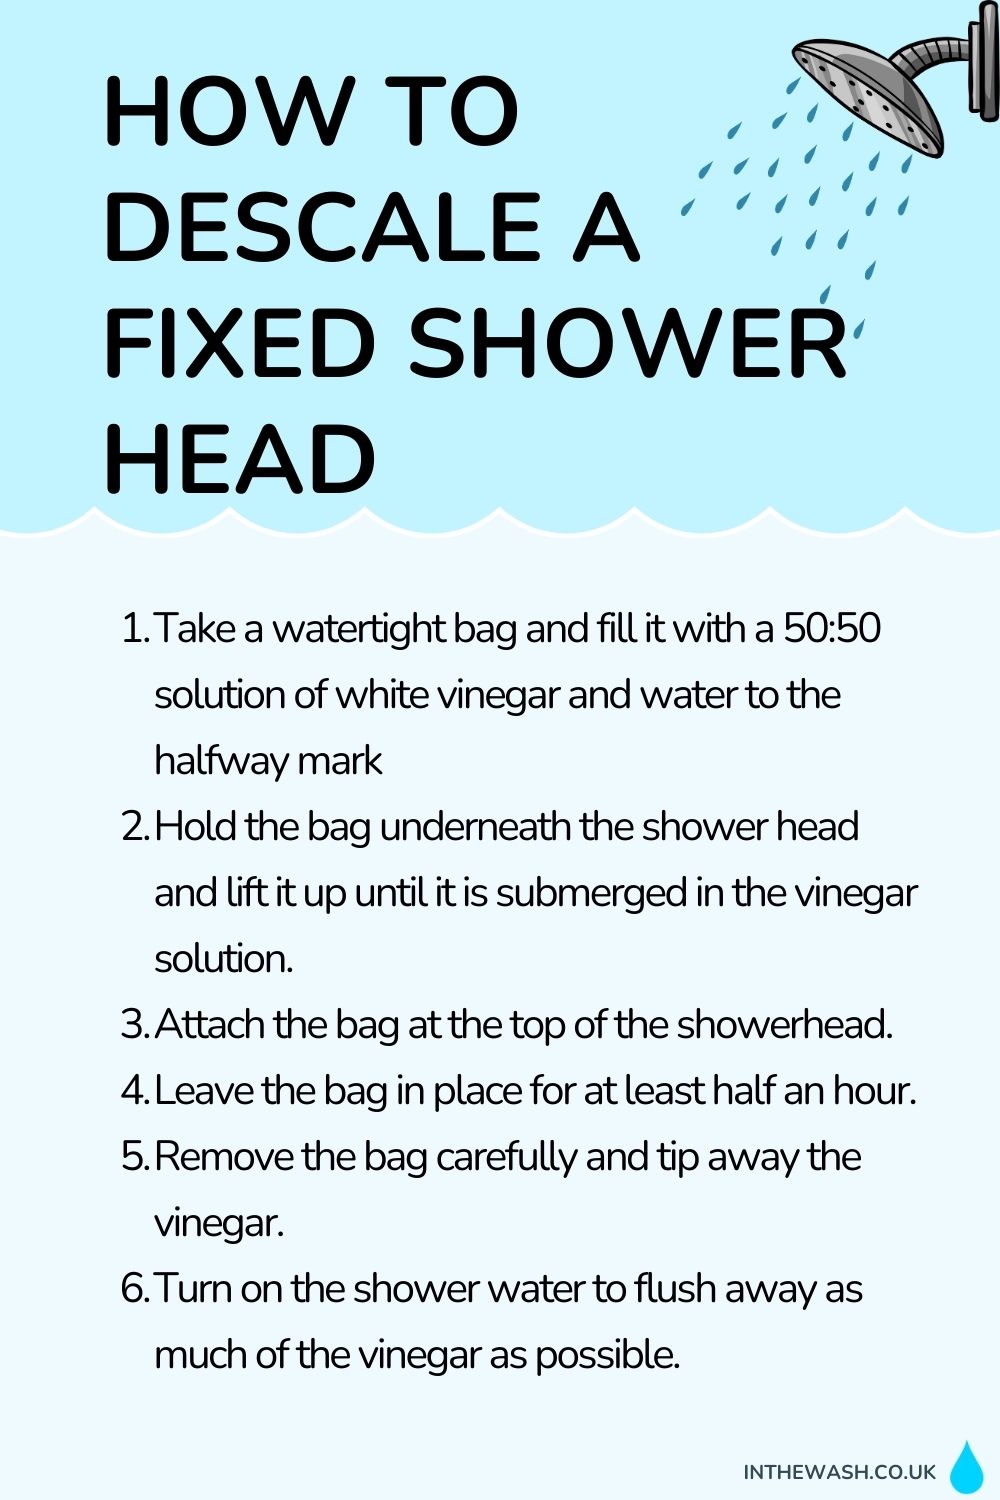 How to descale a fixed shower head